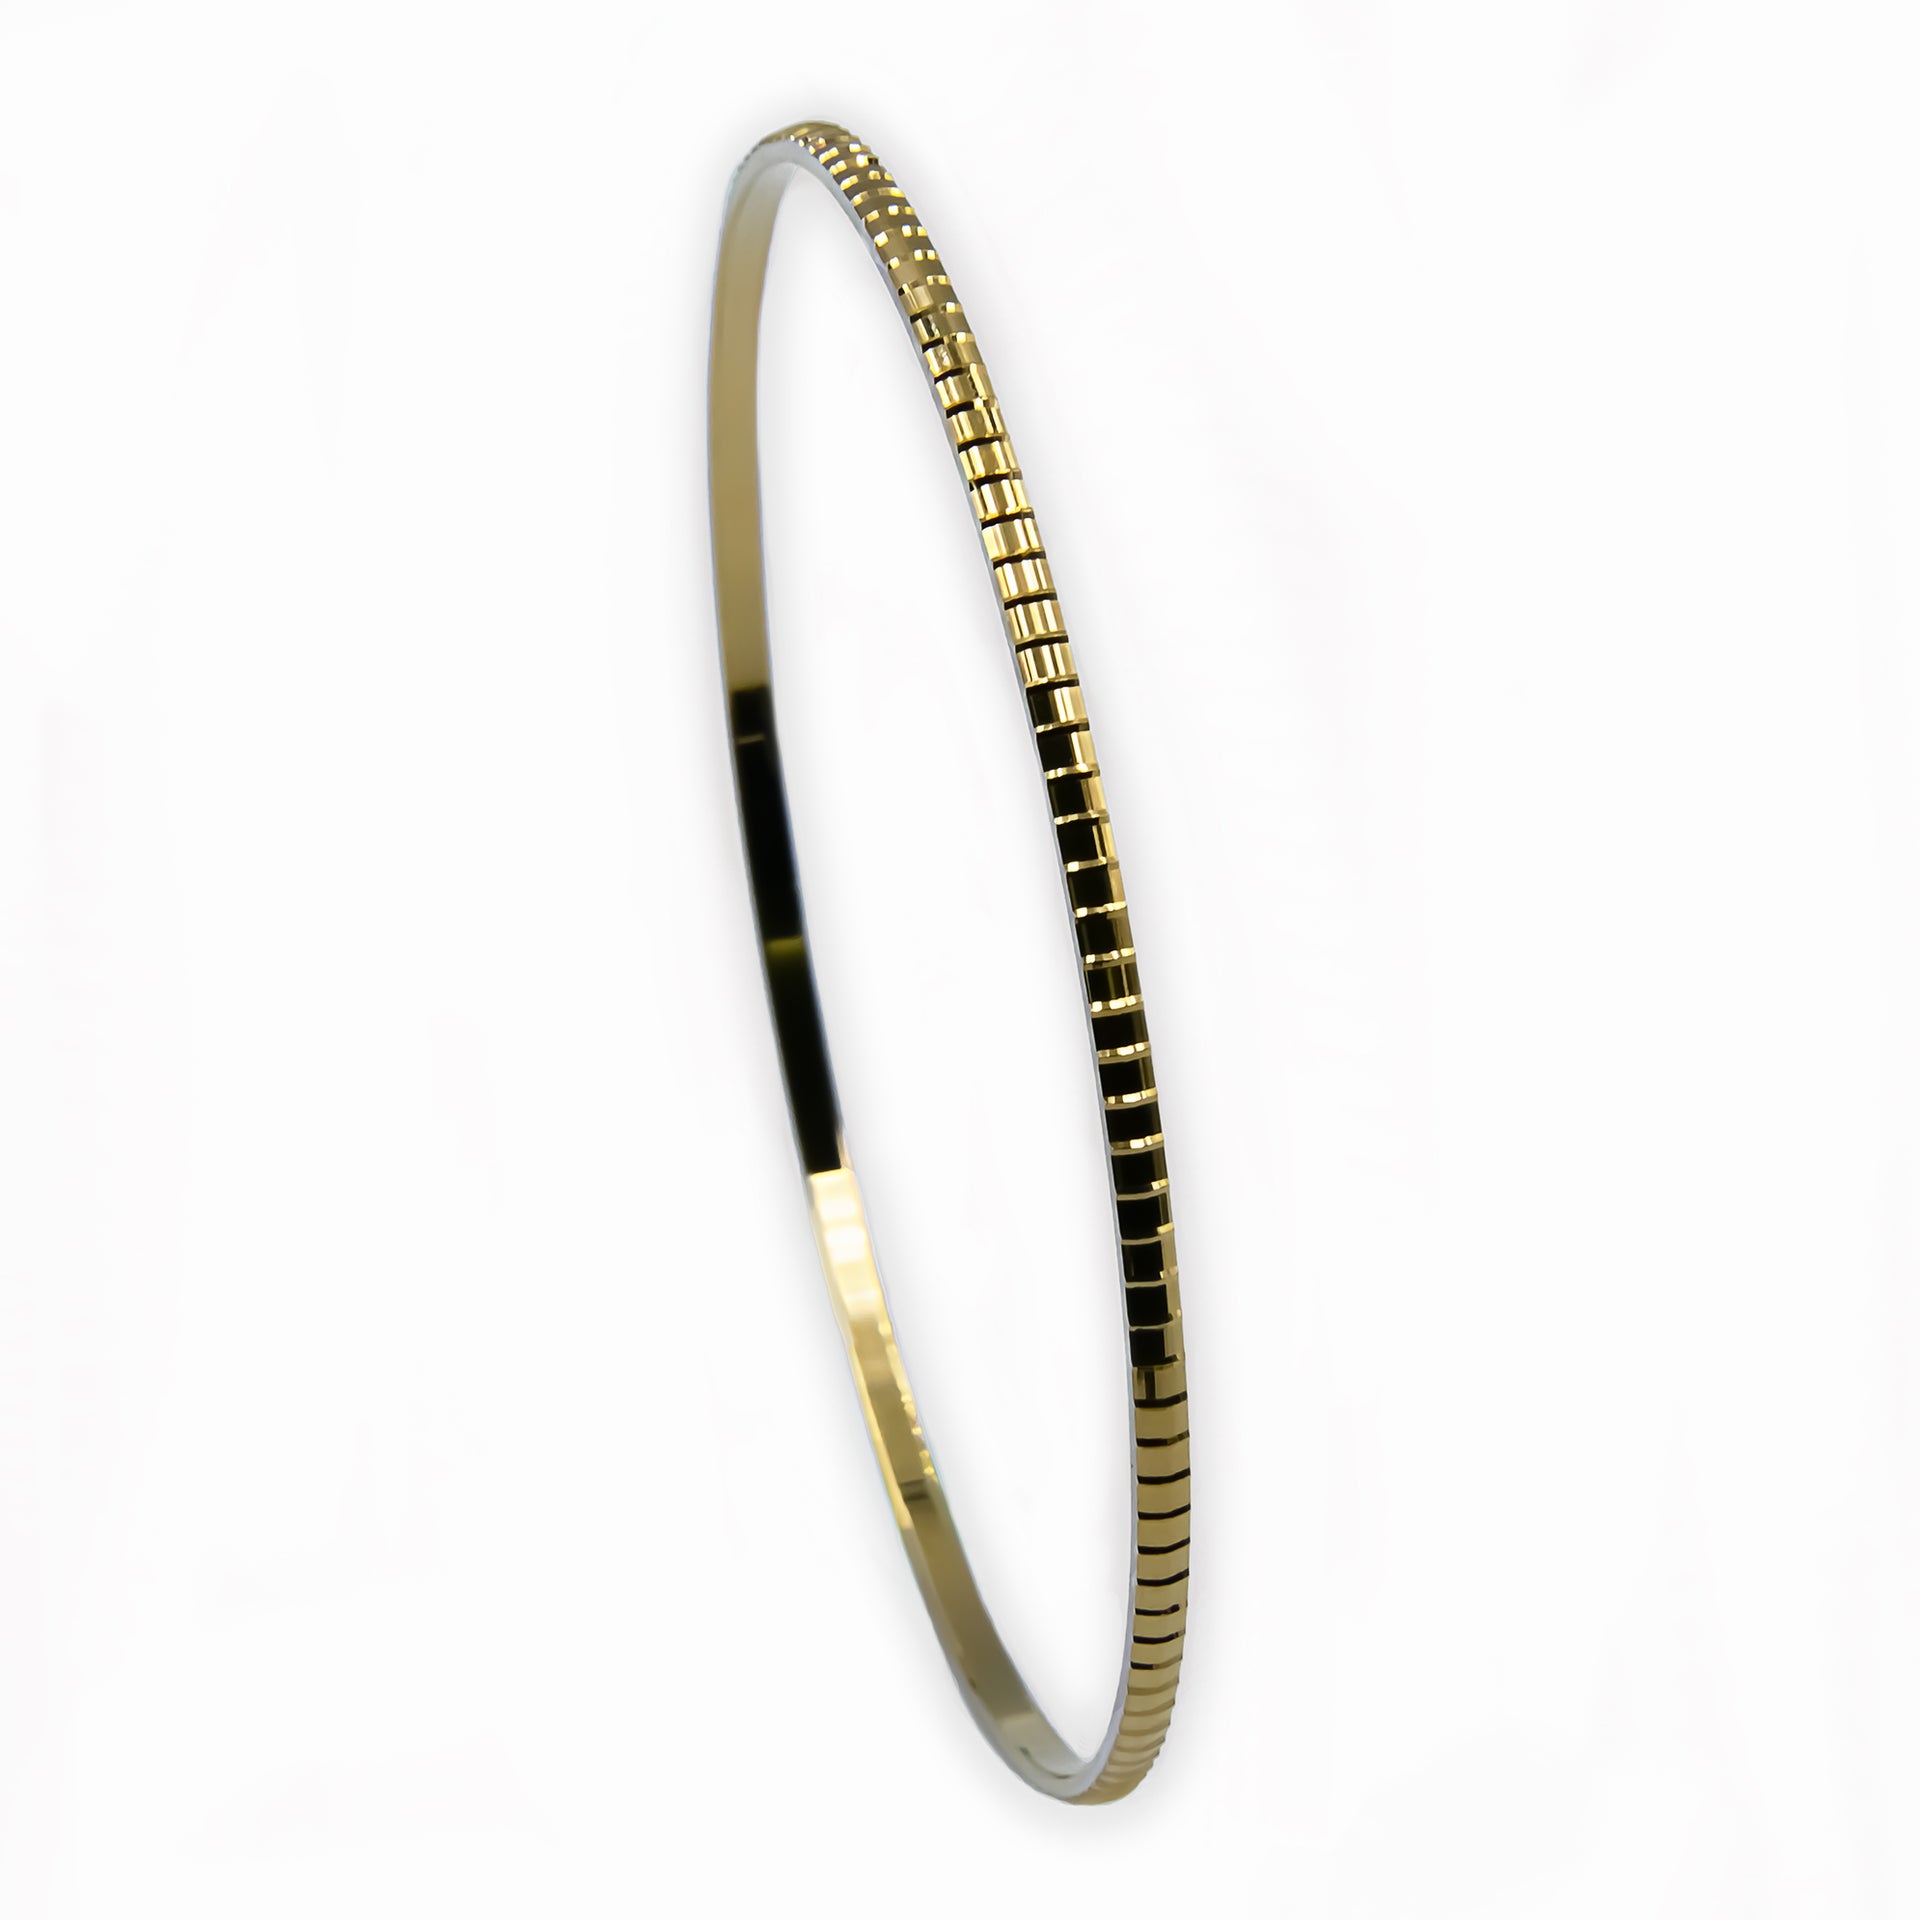 Bangle EARTH IS ROUND 2mm notches yellow gold 18k 750